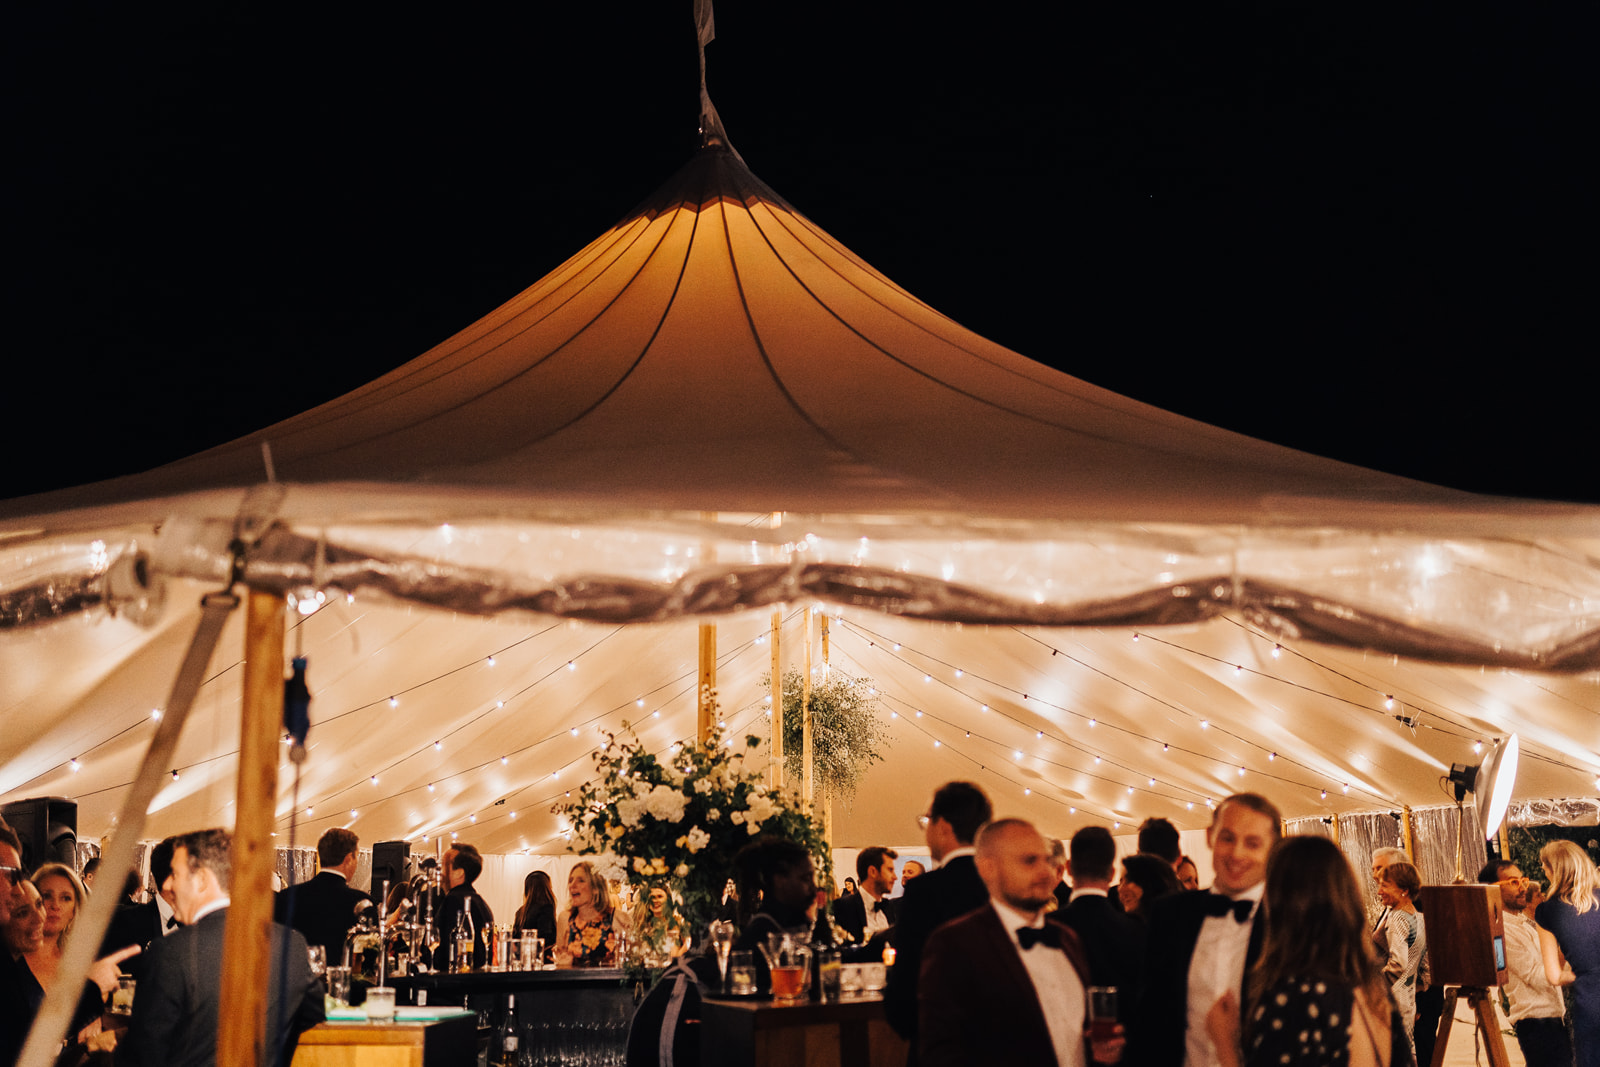 Lora & Dave's Garden Sperry Tent Wedding at night, by Natalie Hewitt & Joseph Benjamin Marquees Images by Rebecca Carpenter Photography